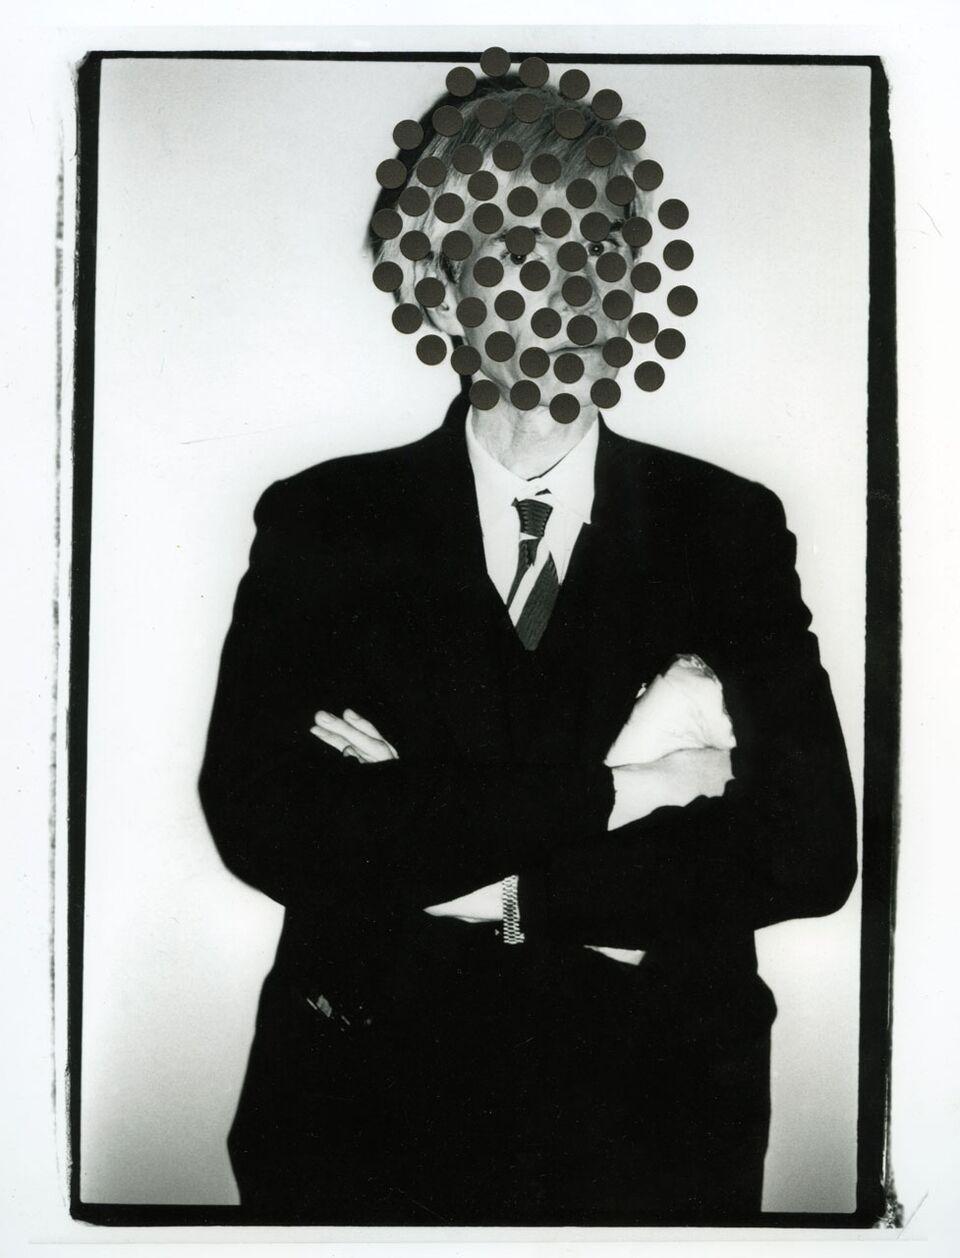 Mark Sink Black and White Photograph - Andy in LA Dots, 2015 Andy Warhol